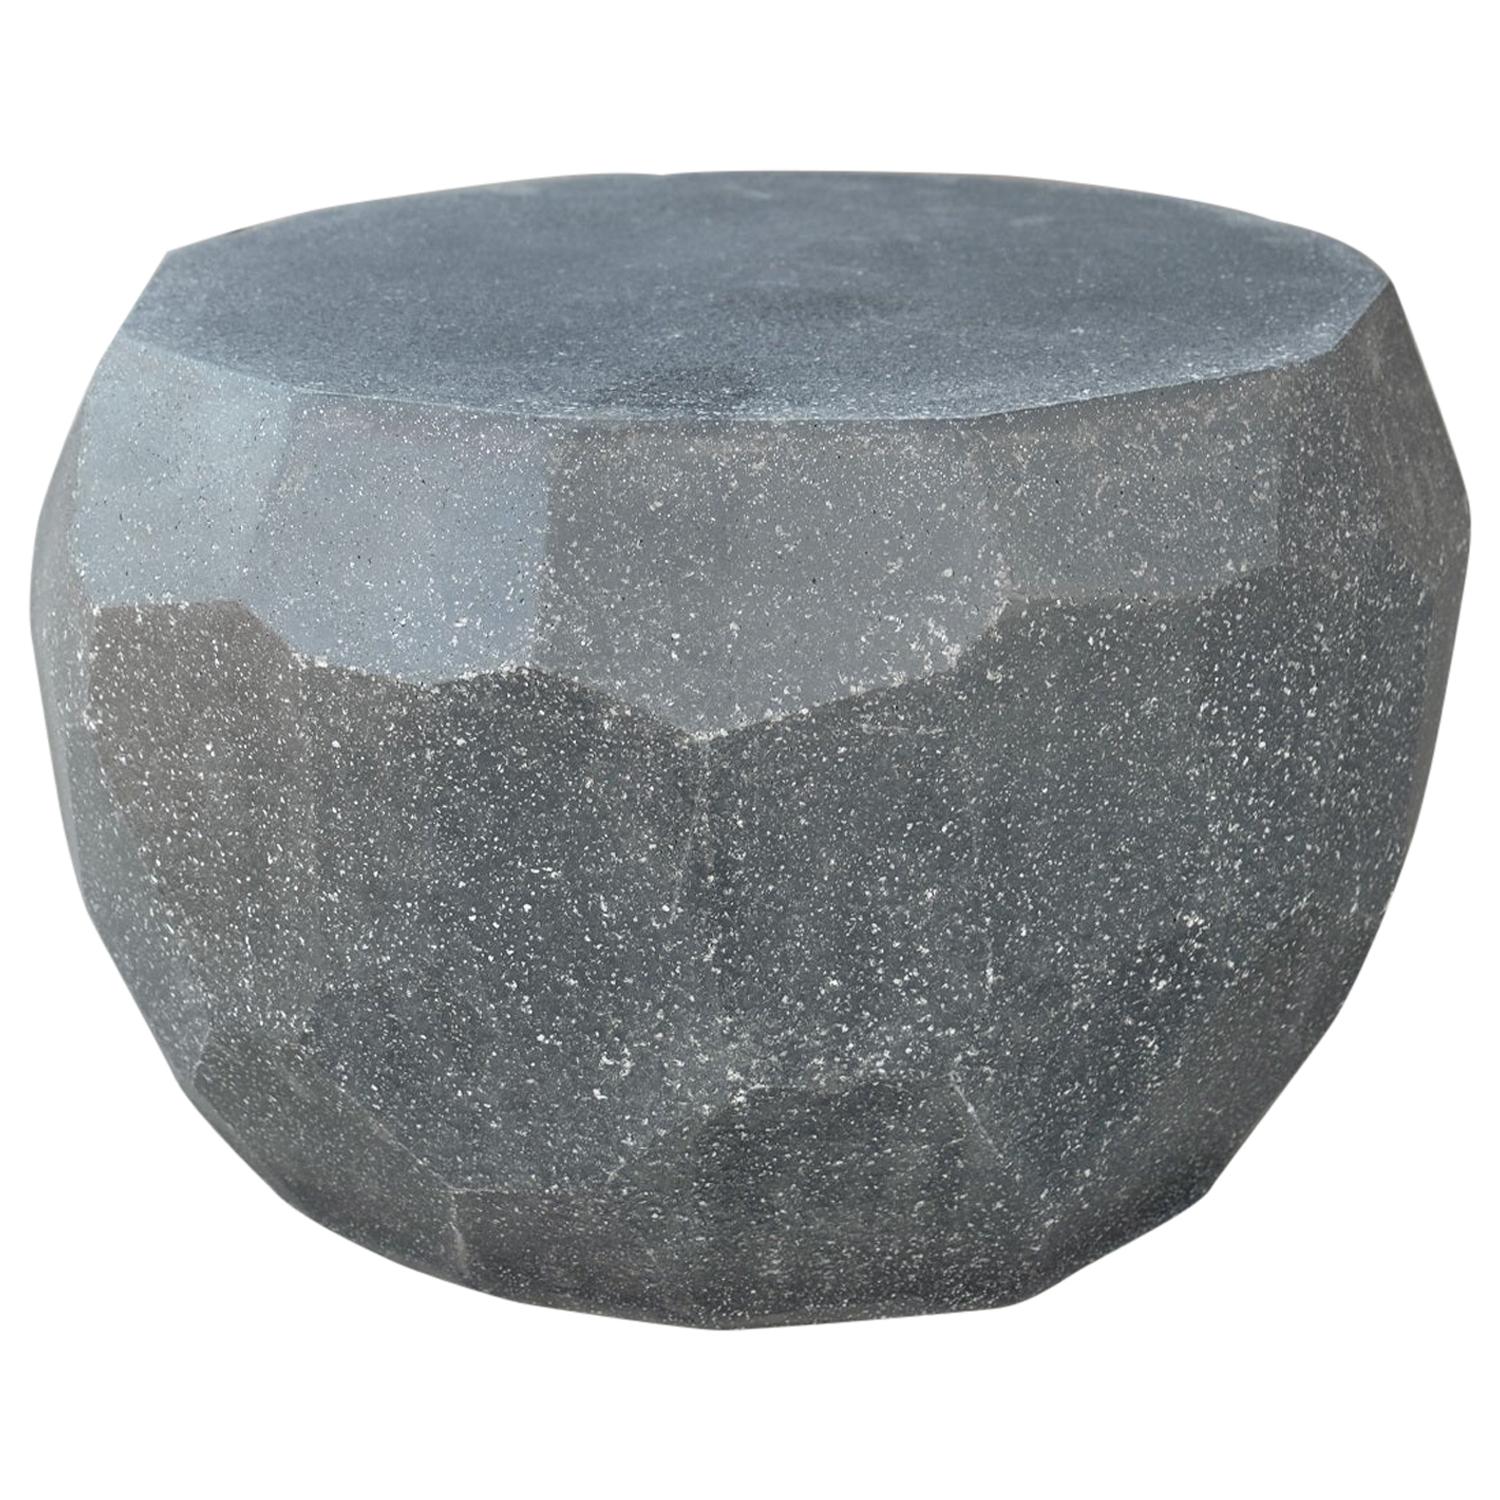 Cast Resin 'Facet' Low Table, Coal Stone Finish by Zachary A. Design For Sale